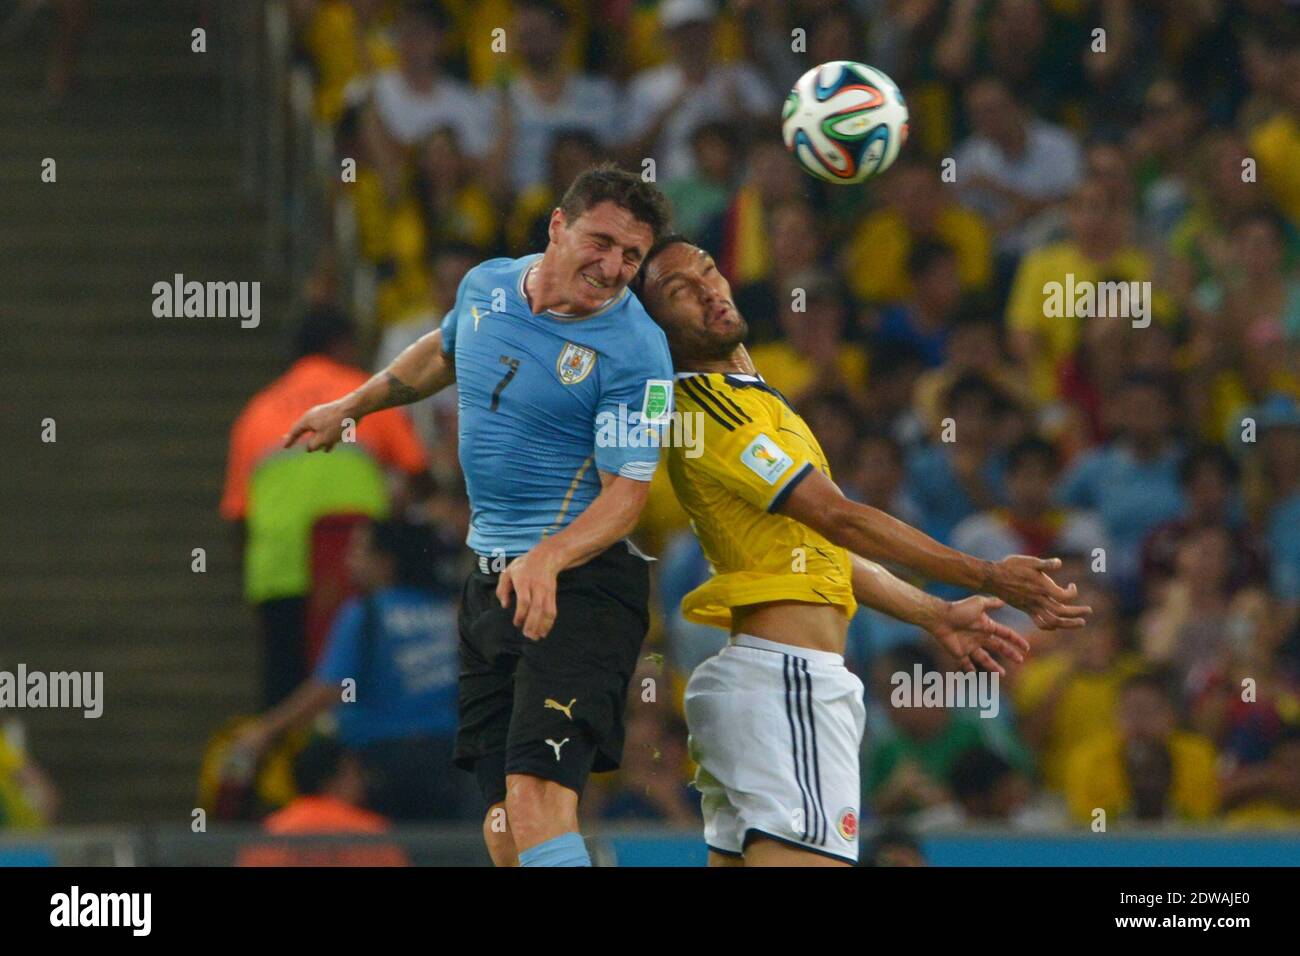 Colombia's Abel Aguilar battling Uruguay's Cristian Rodriguez during Soccer World Cup 2014 1/8 of final round match Colombia v Uruguay at Maracana Stadium, Rio de Janeiro, Brazil on June 28, 2014. Colombia won 2-0. Photo by Henri Szwarc/ABACAPRESS.COM Stock Photo